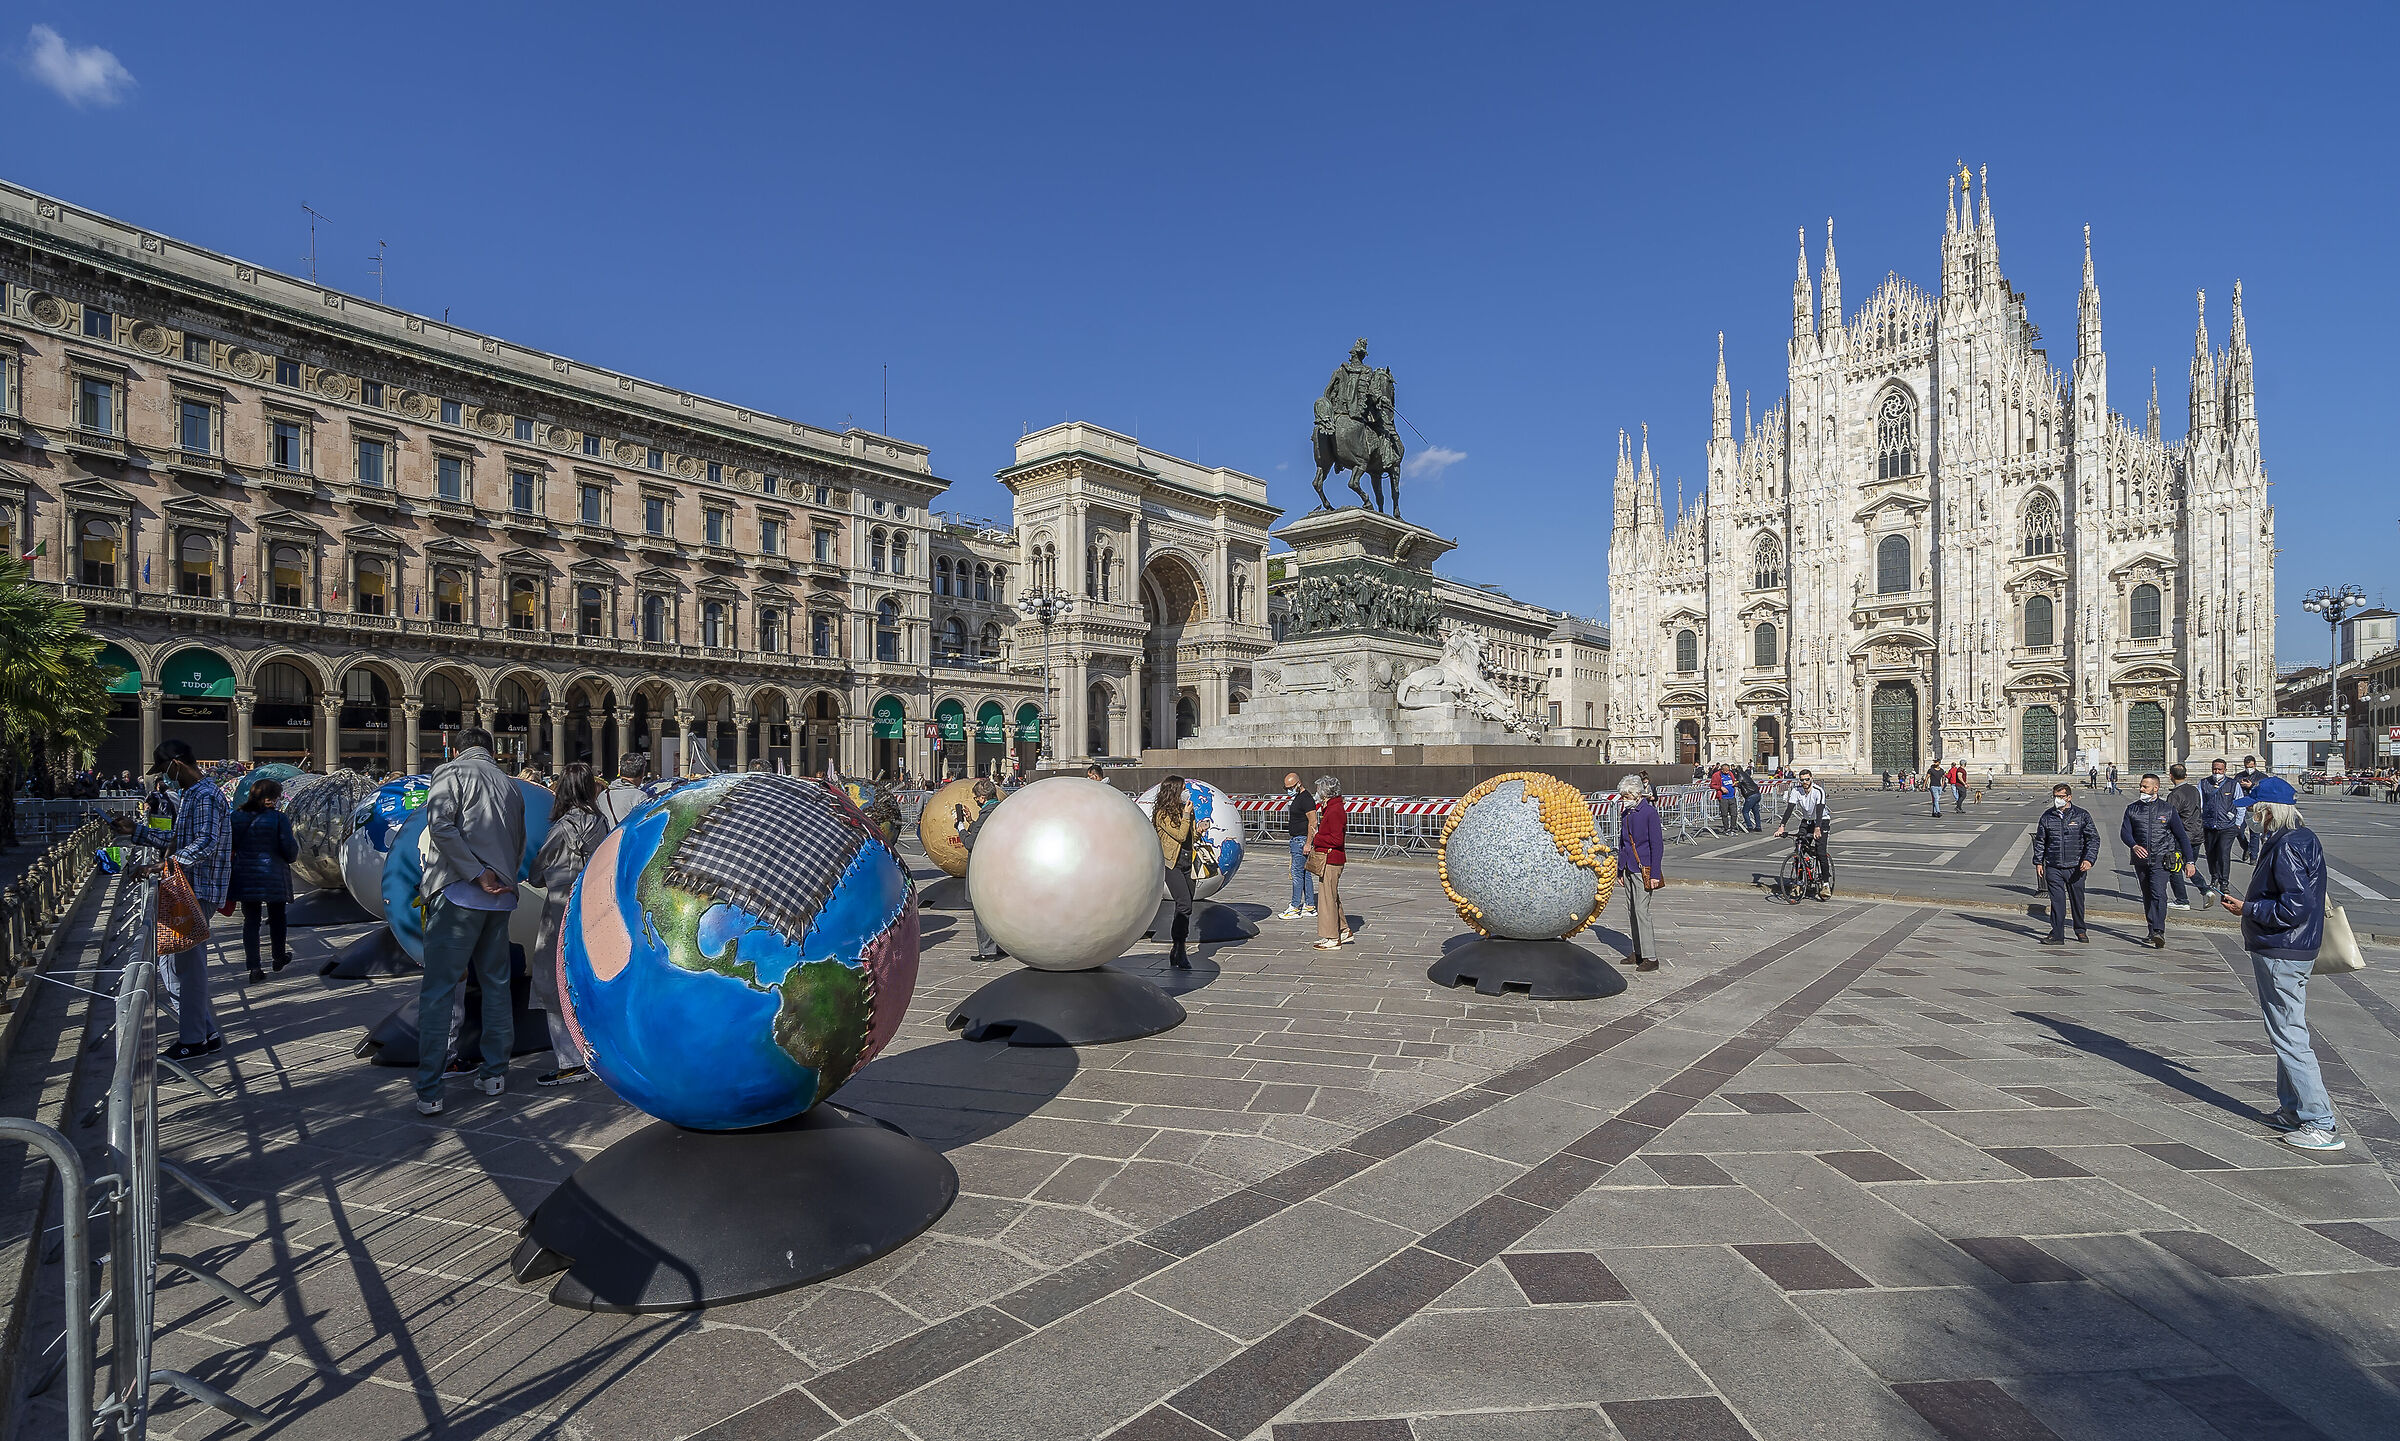 WePlanet - Easter 2021 in Piazza del Duomo - 16:36:16...